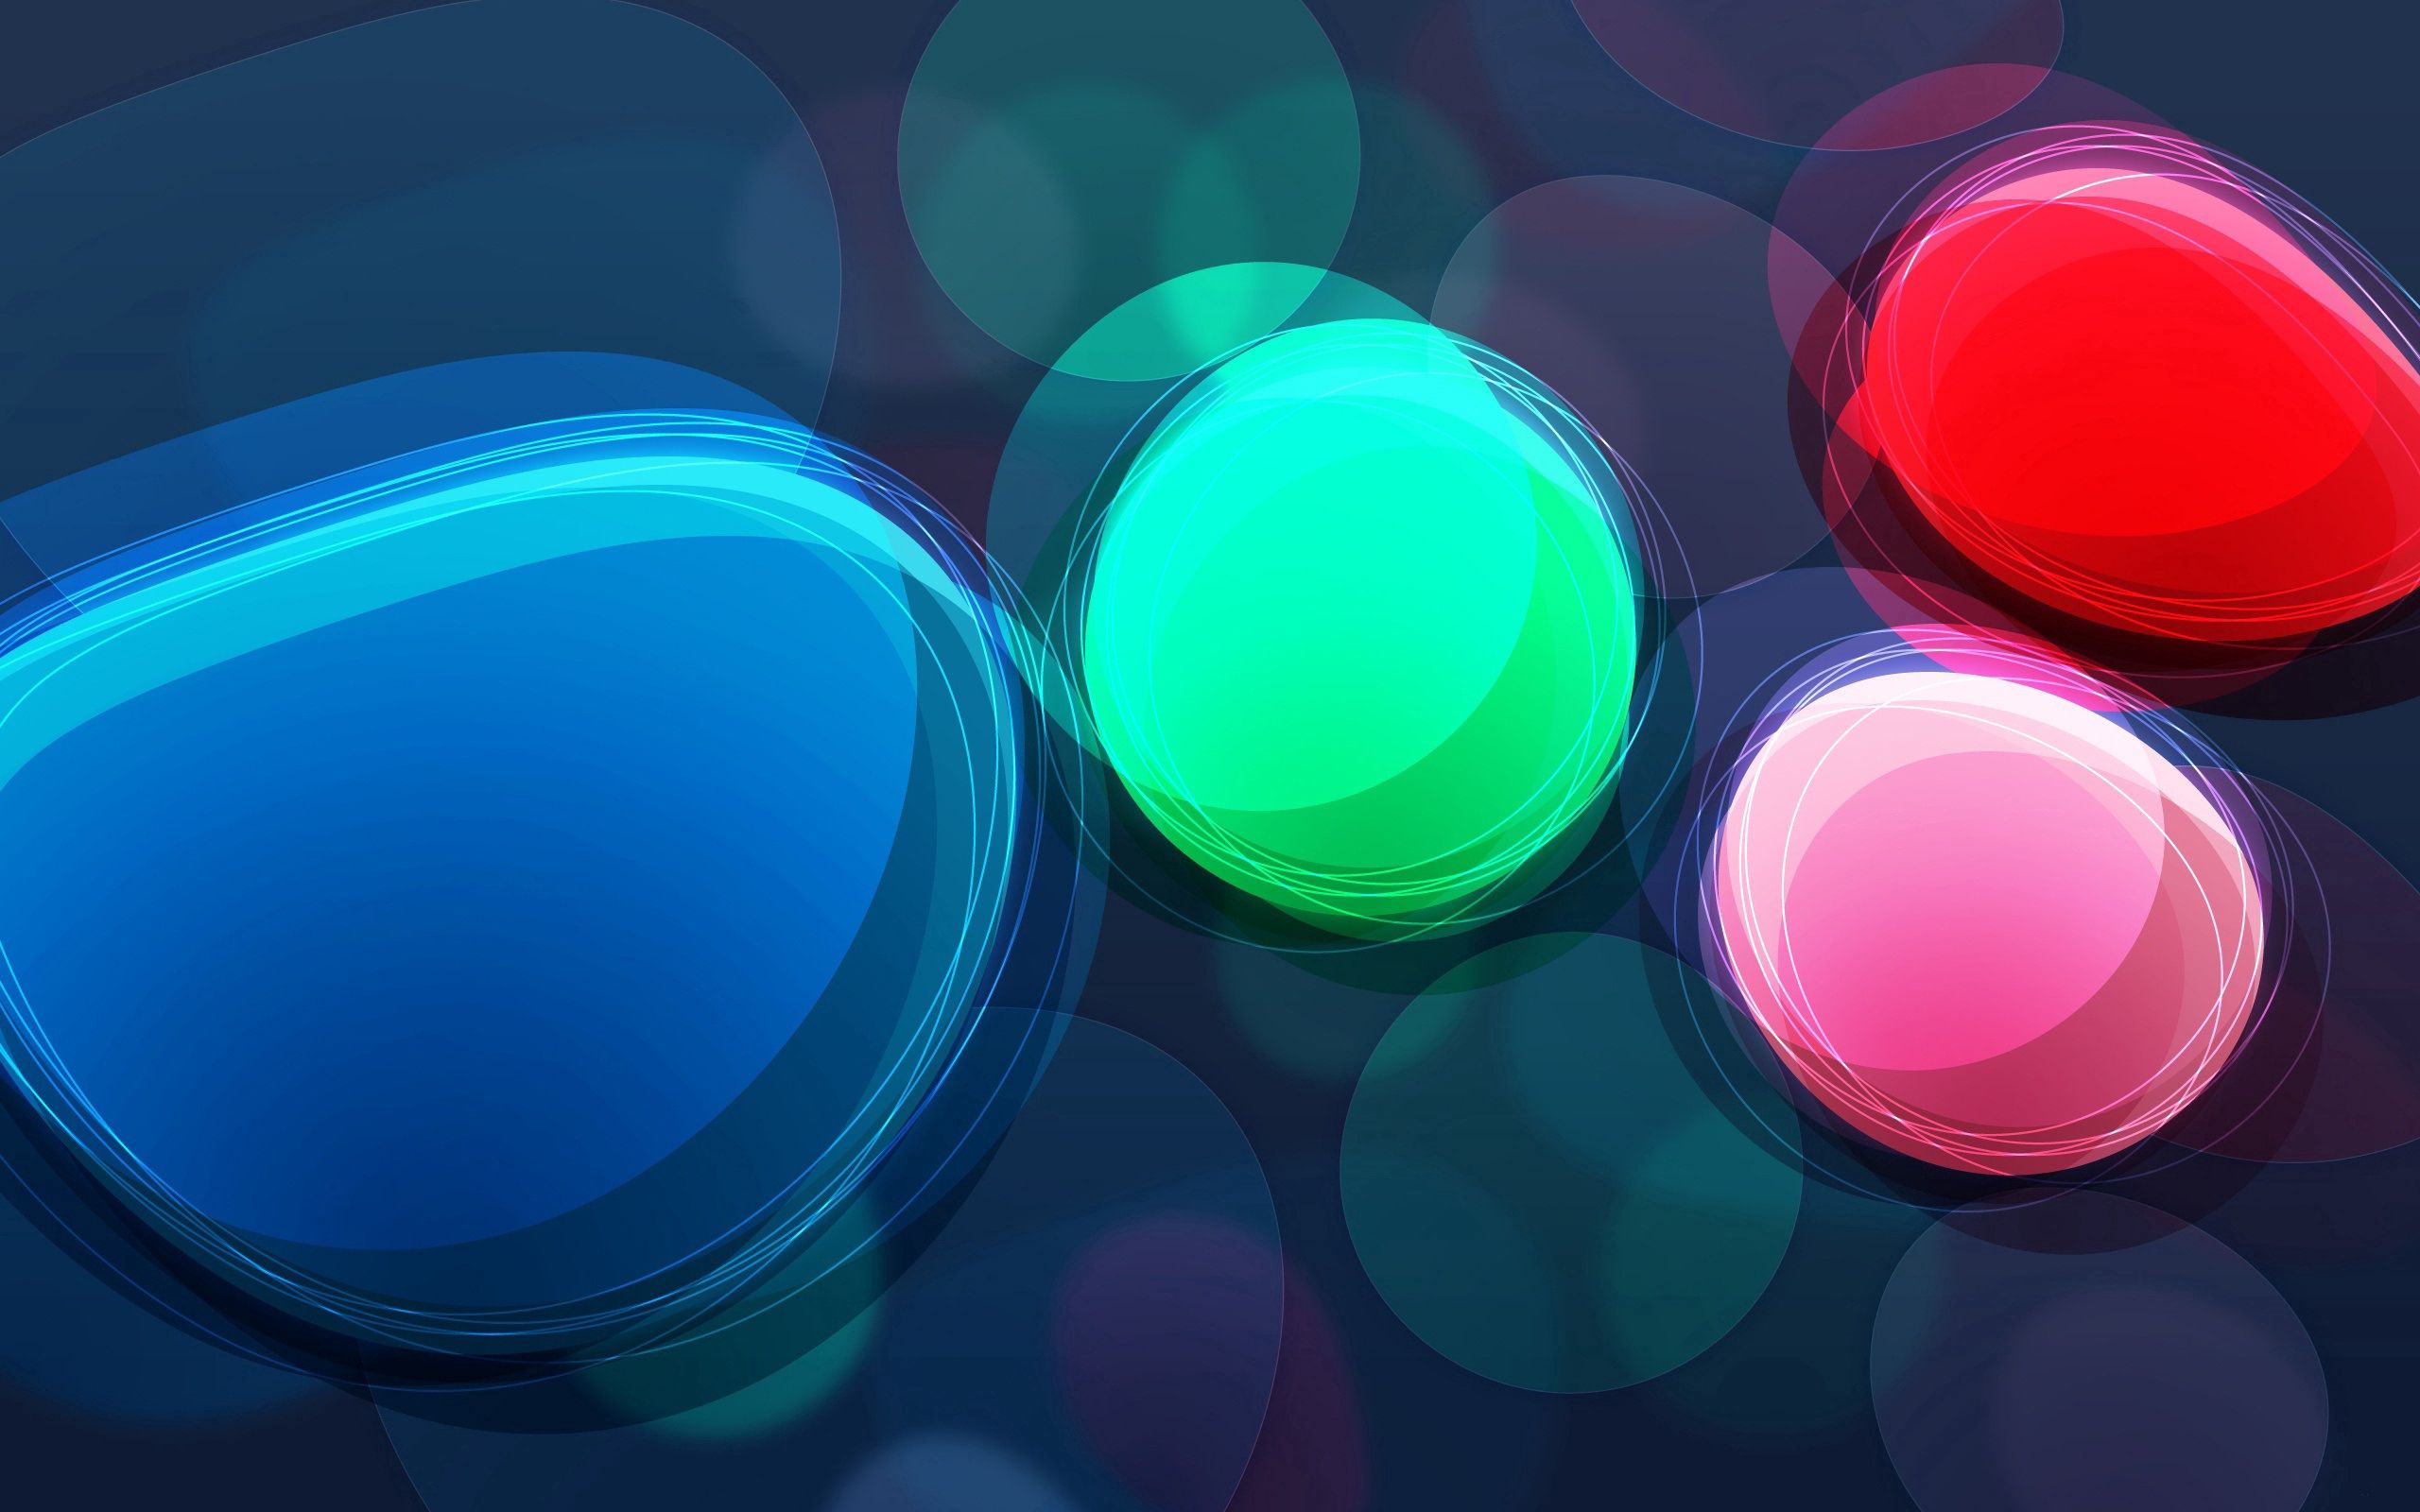 Wallpaper Full HD multicolored, colorful, colourful, abstract, circles, motley